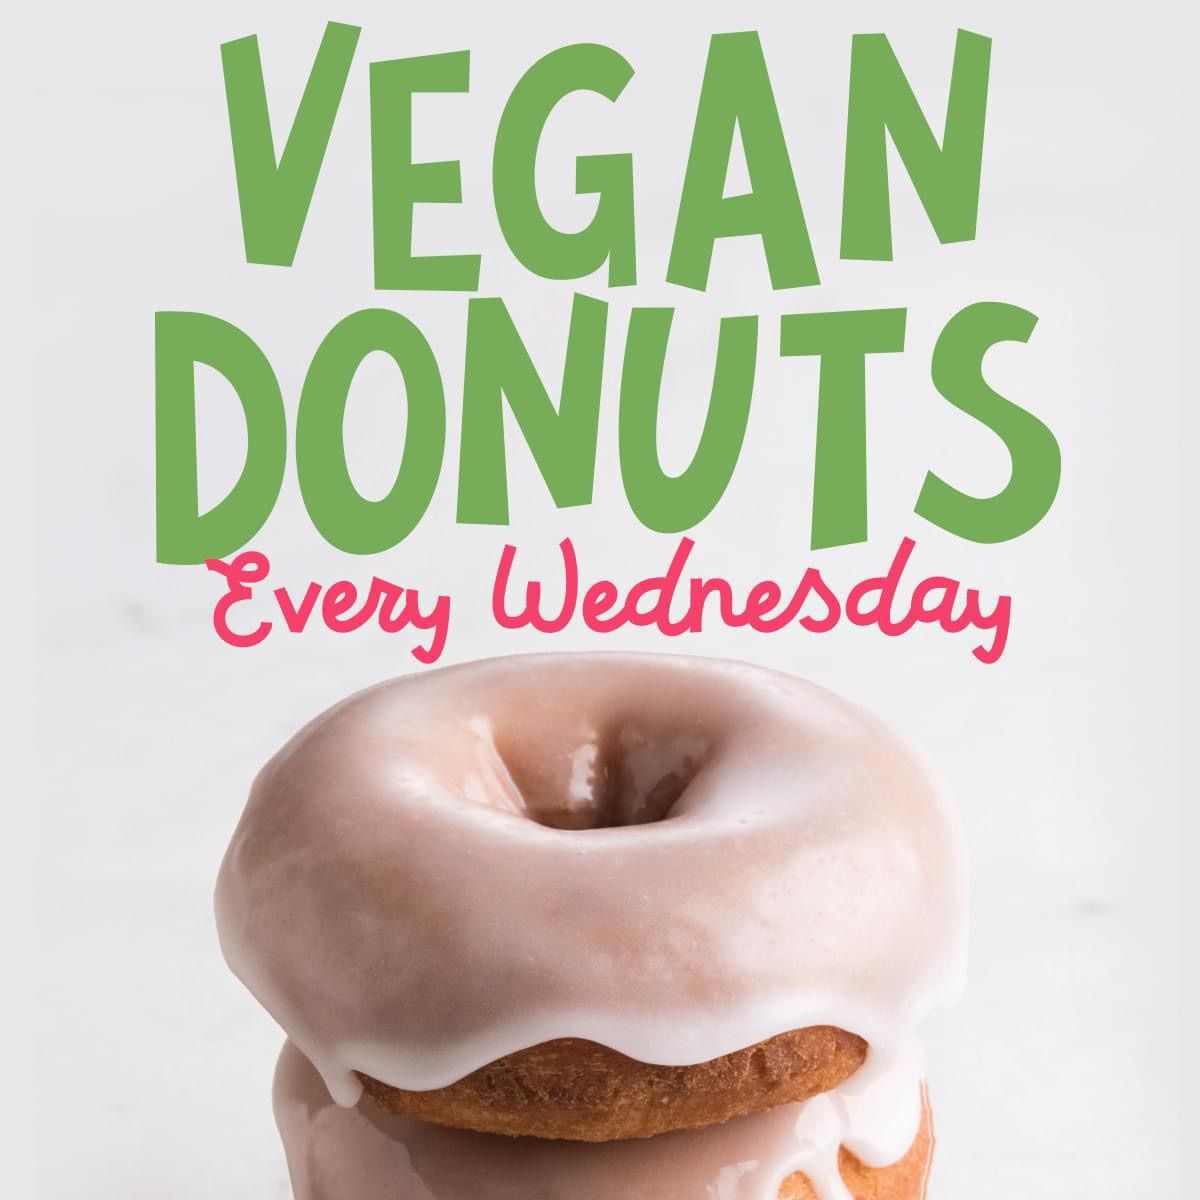 VEGAN DONUTS Now Available Every Wednesday!